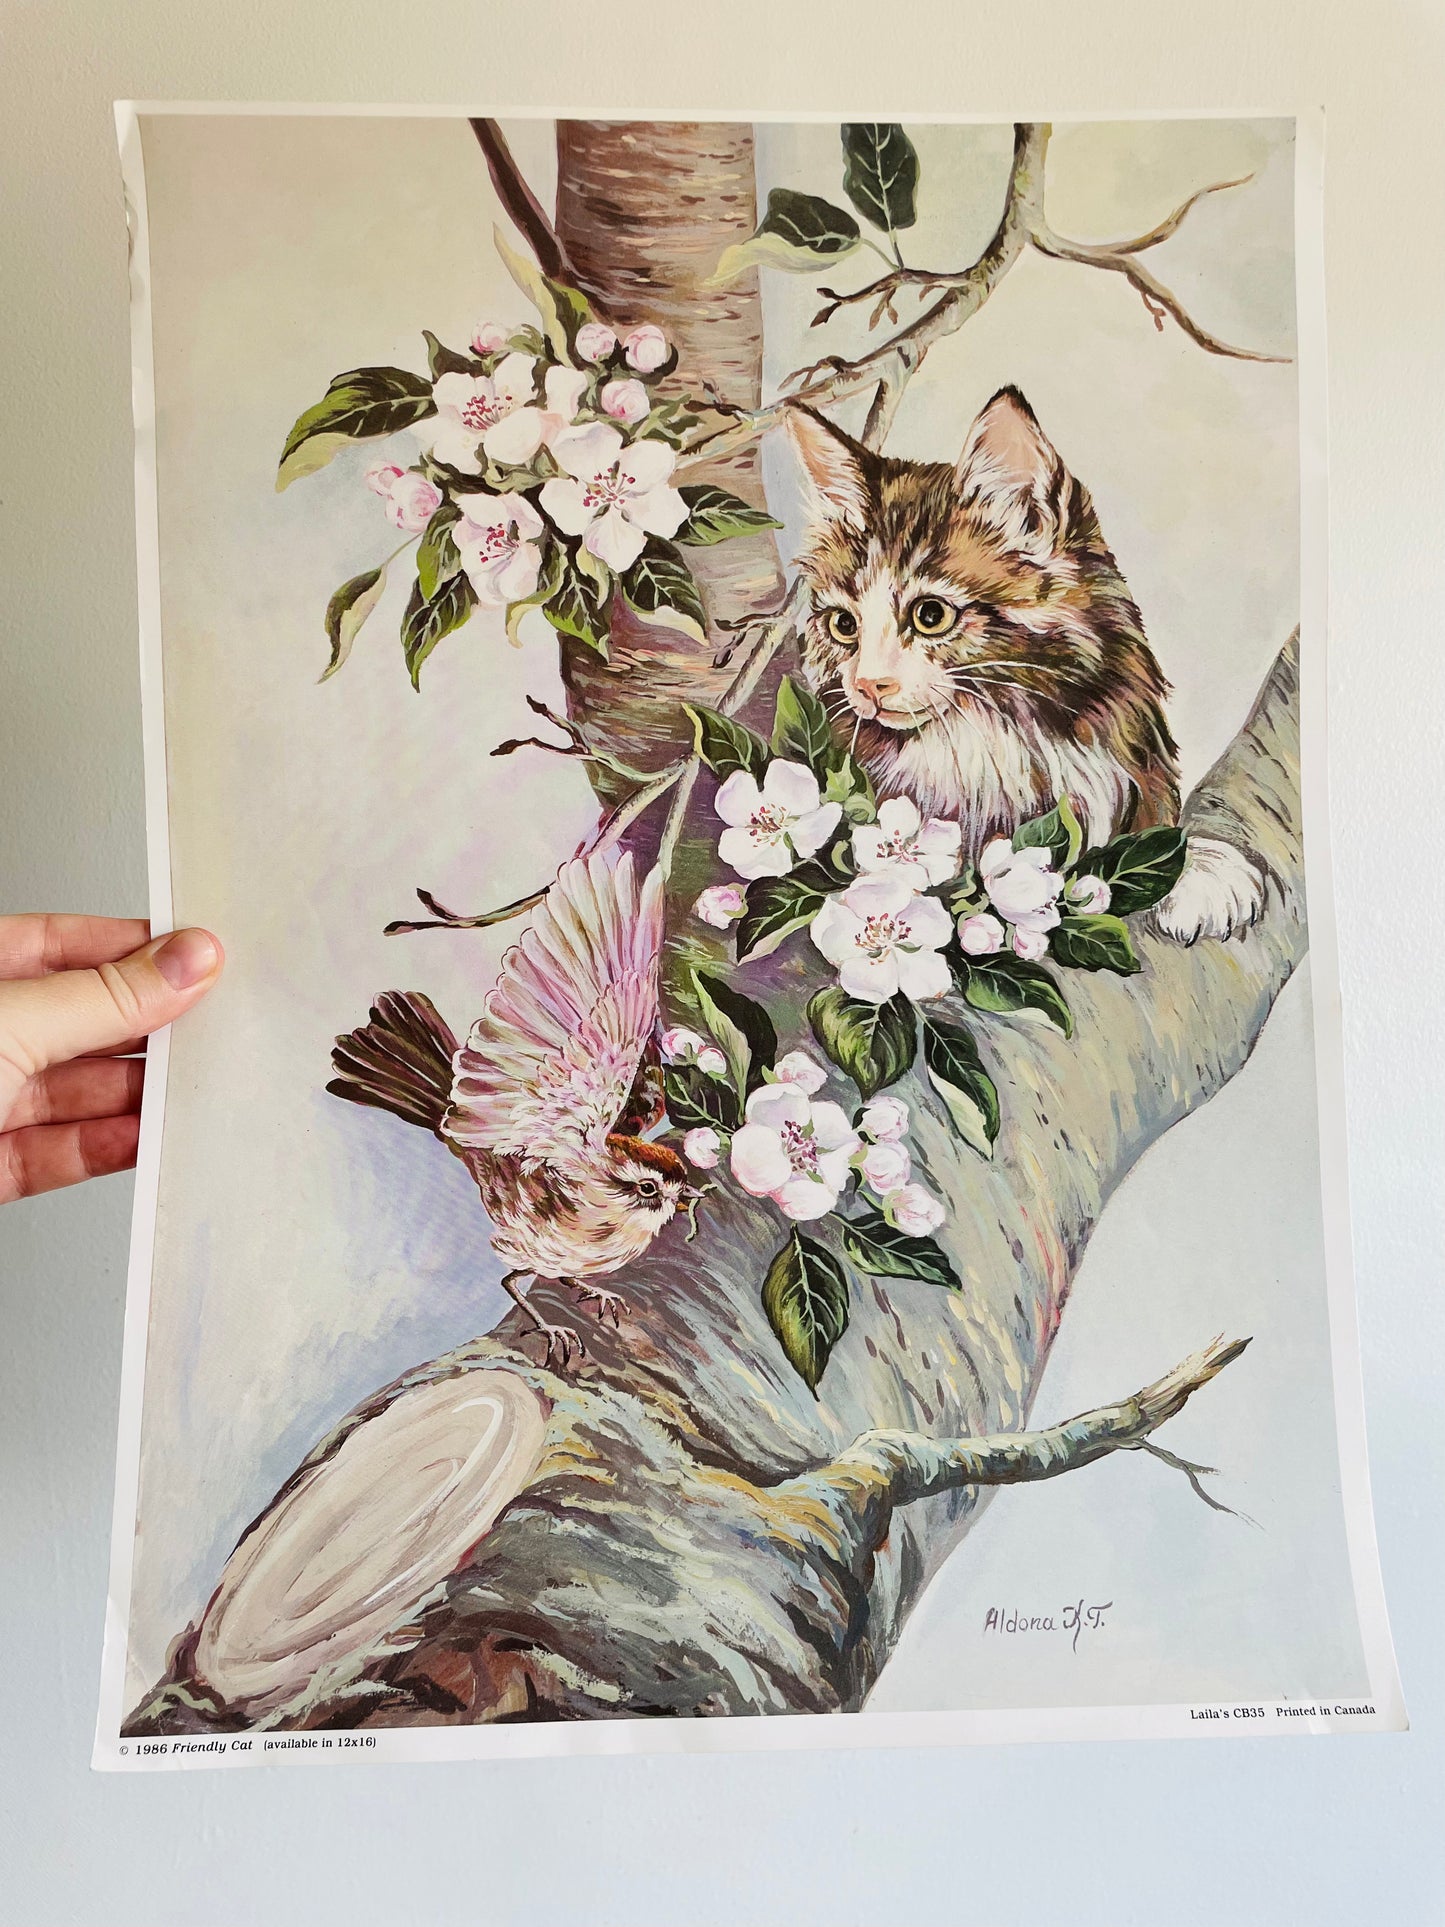 Friendly Cat Poster Print - Ready for Framing! Printed in Canada (1986)